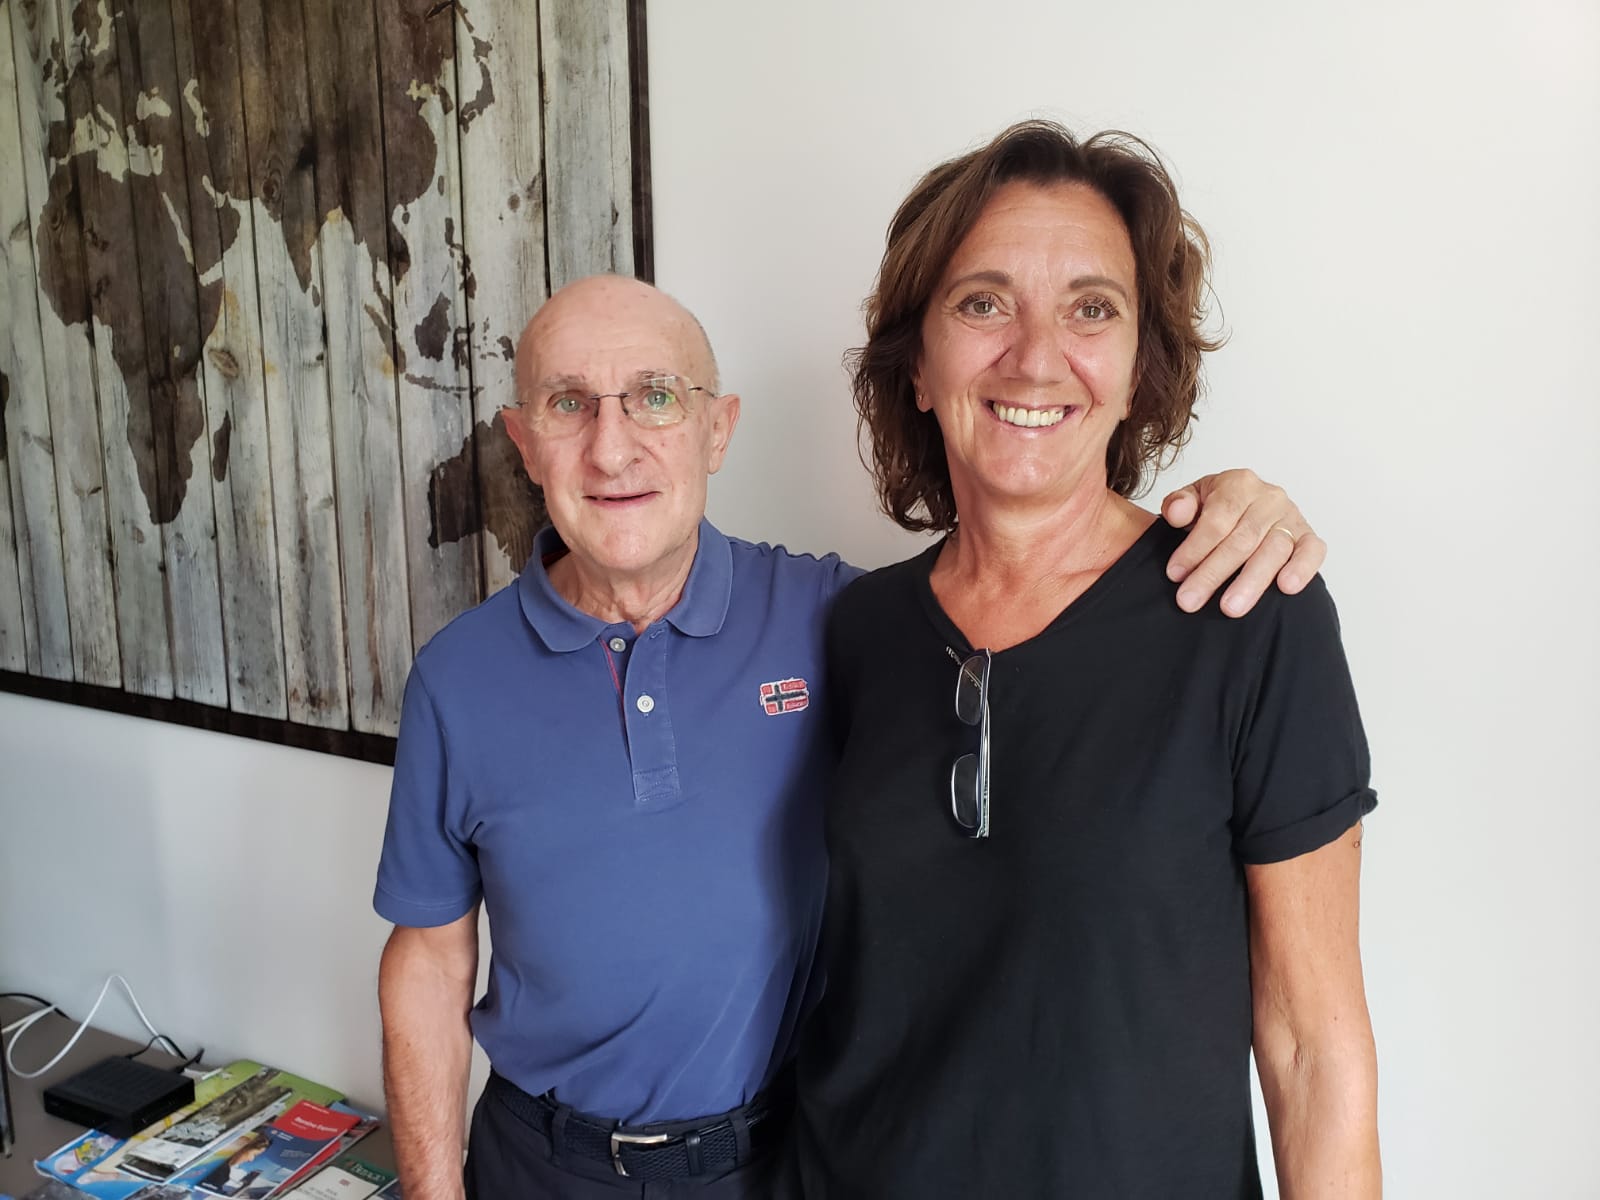  Our wonderful hosts in Bellano, Dante and Paola. They were celebrating their 37th wedding anniversary today! 